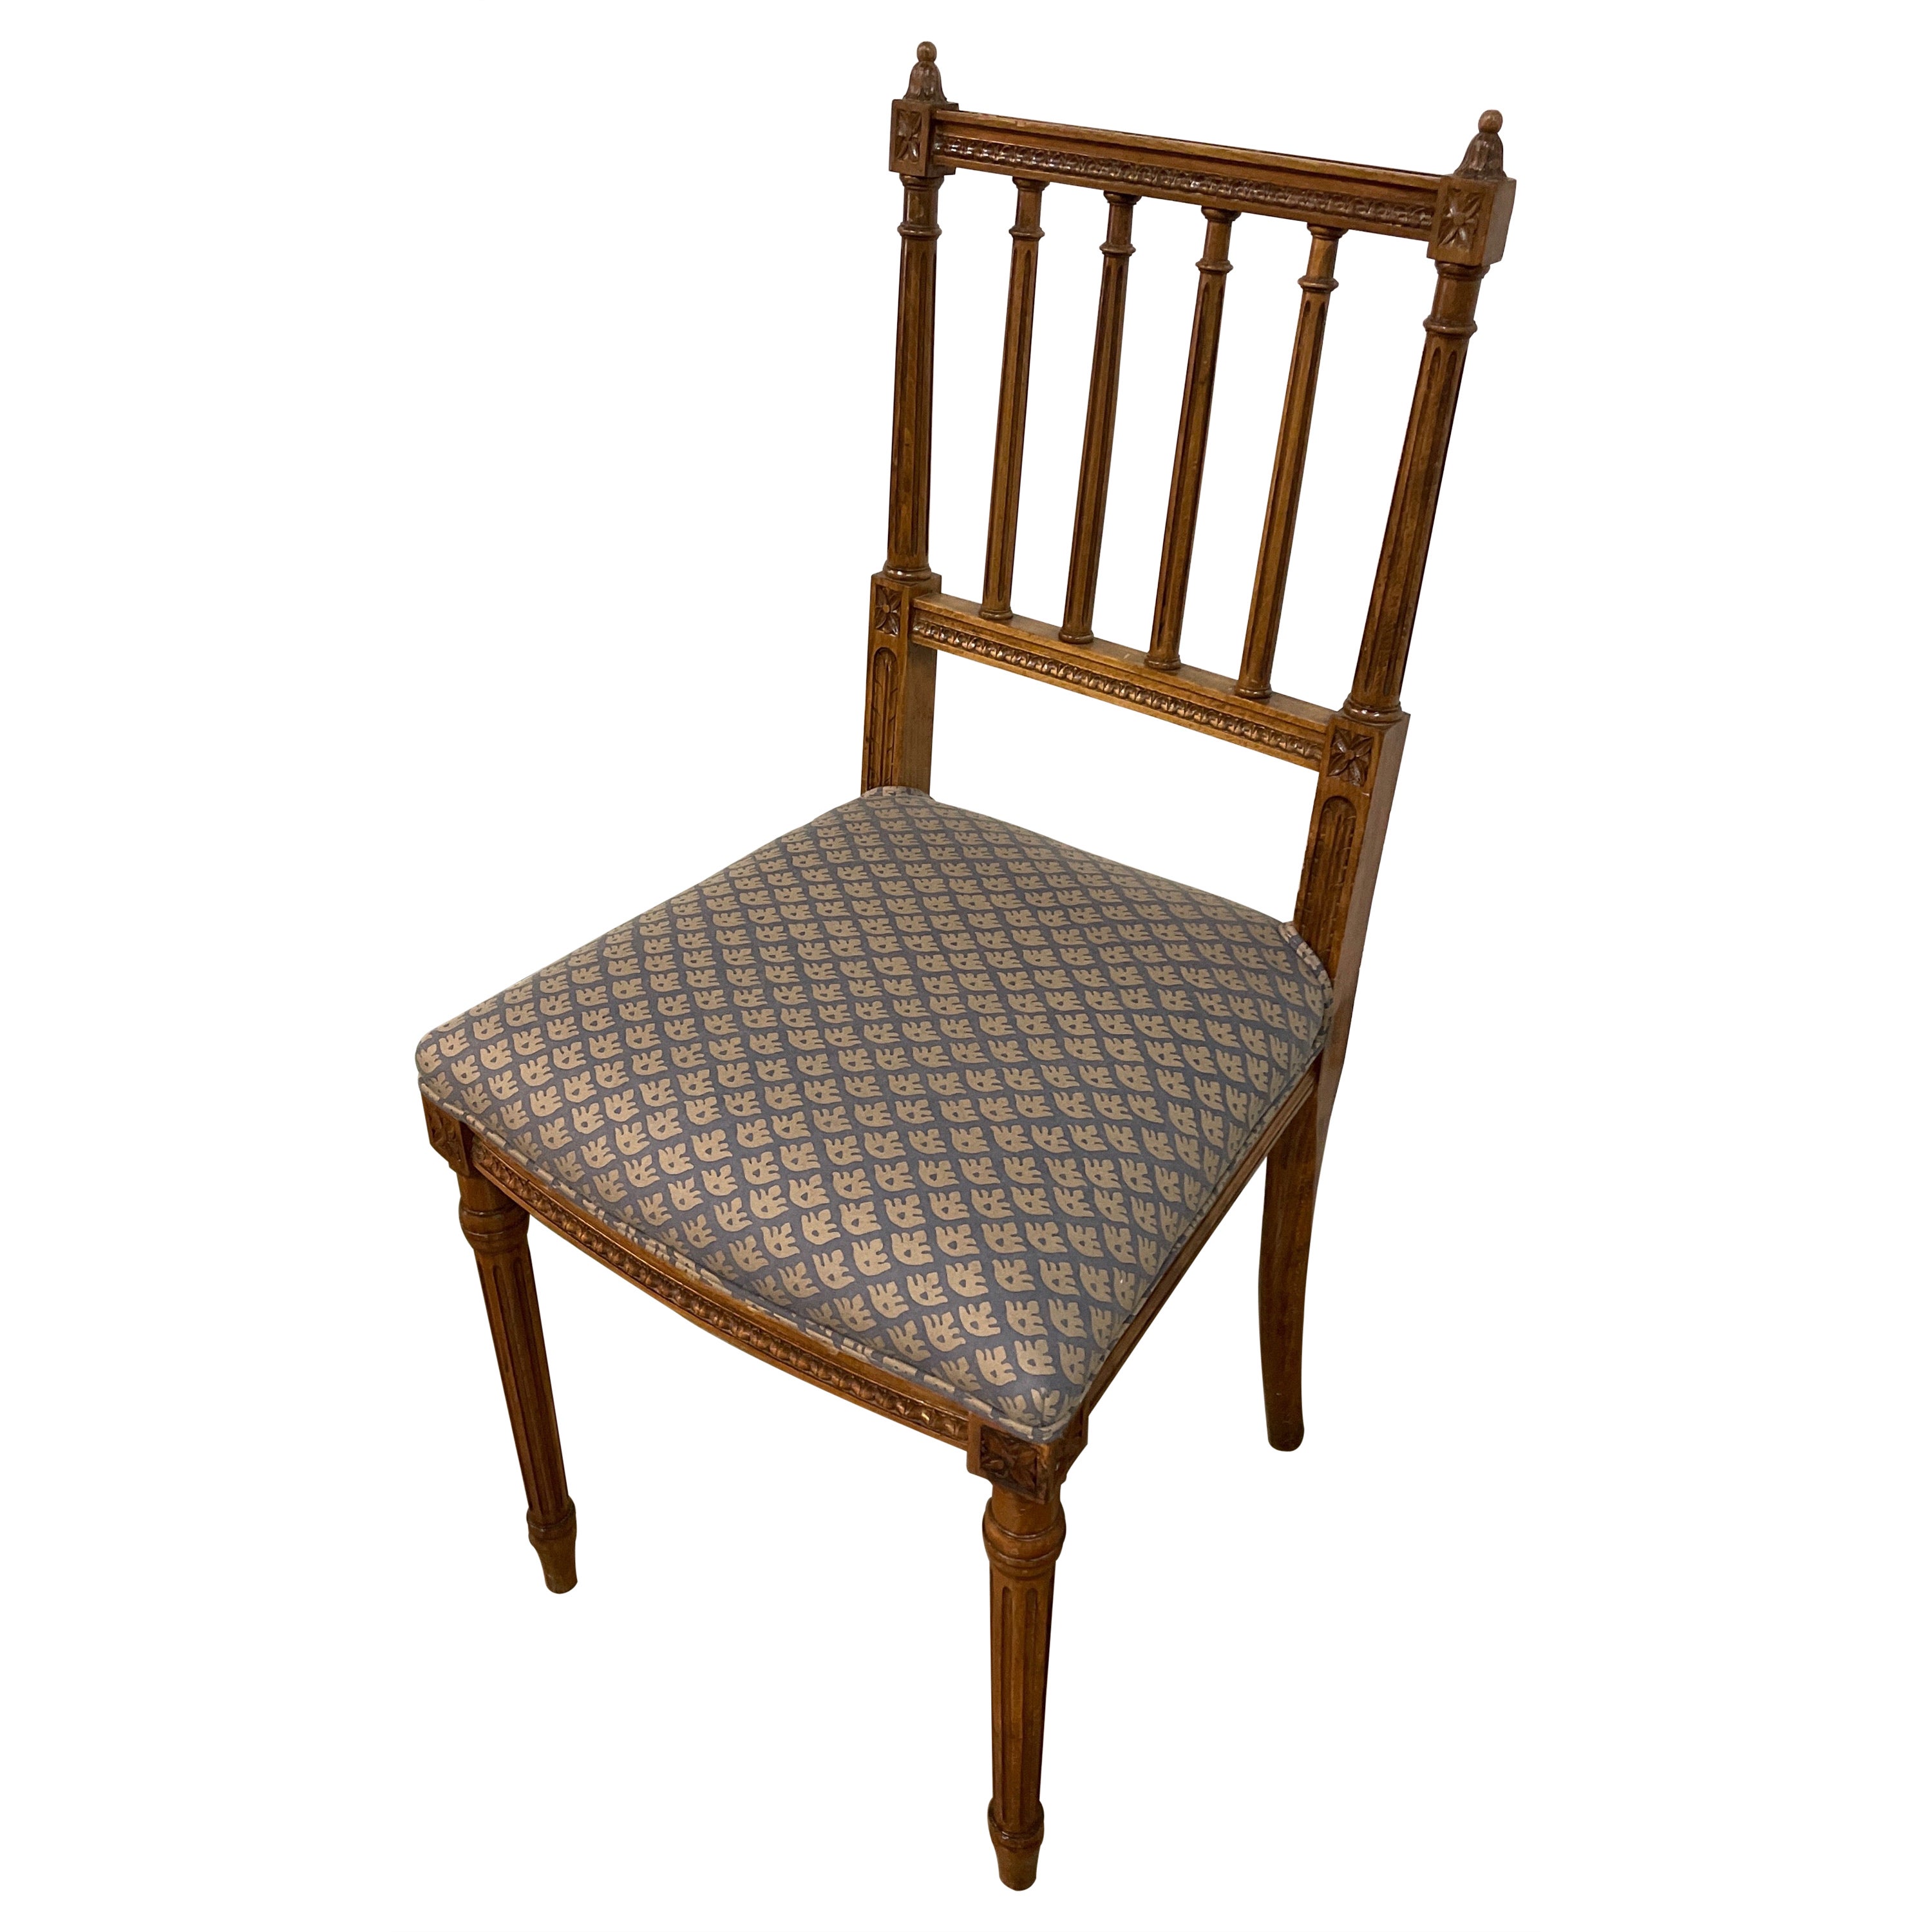 Antique Louis XVI Style Chiavari Chair with Fortuny Upholstered Seat